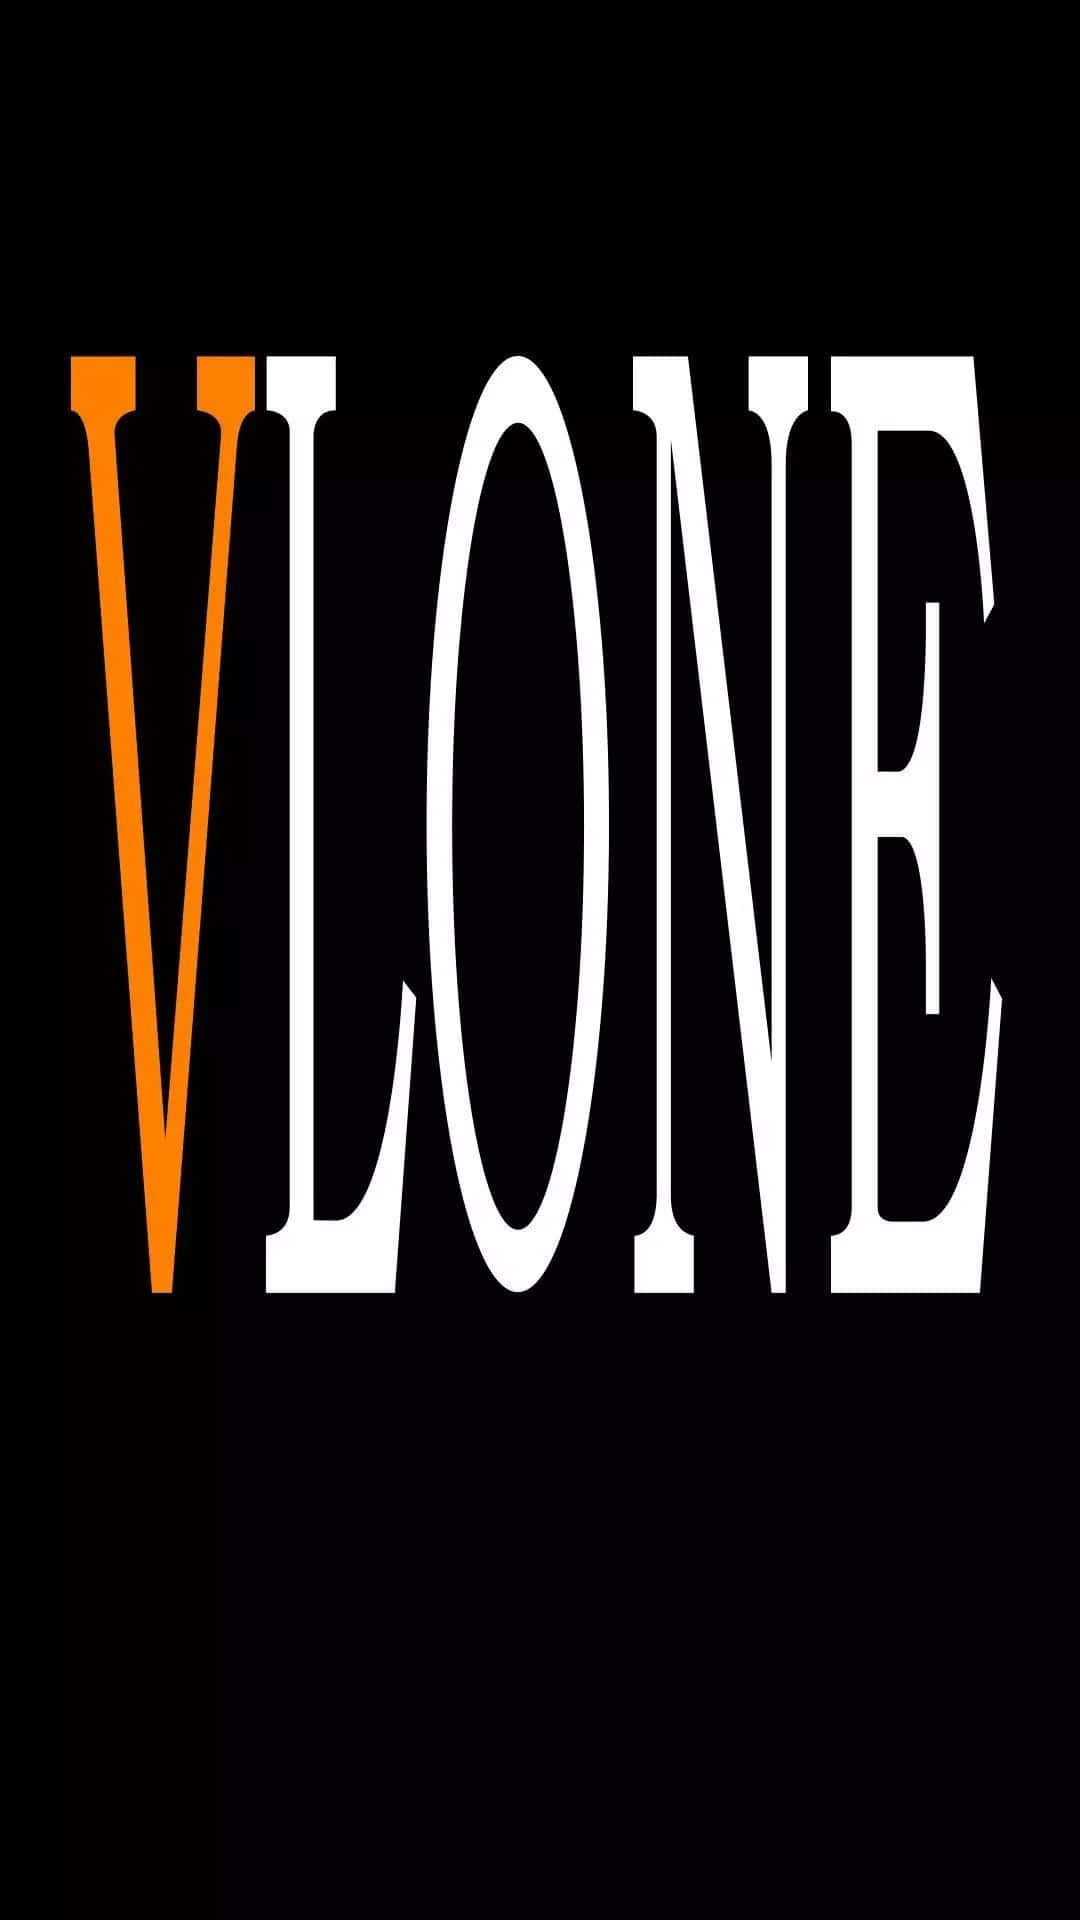 The All-New Vlone iPhone - Get The Latest Look&Style Wallpaper